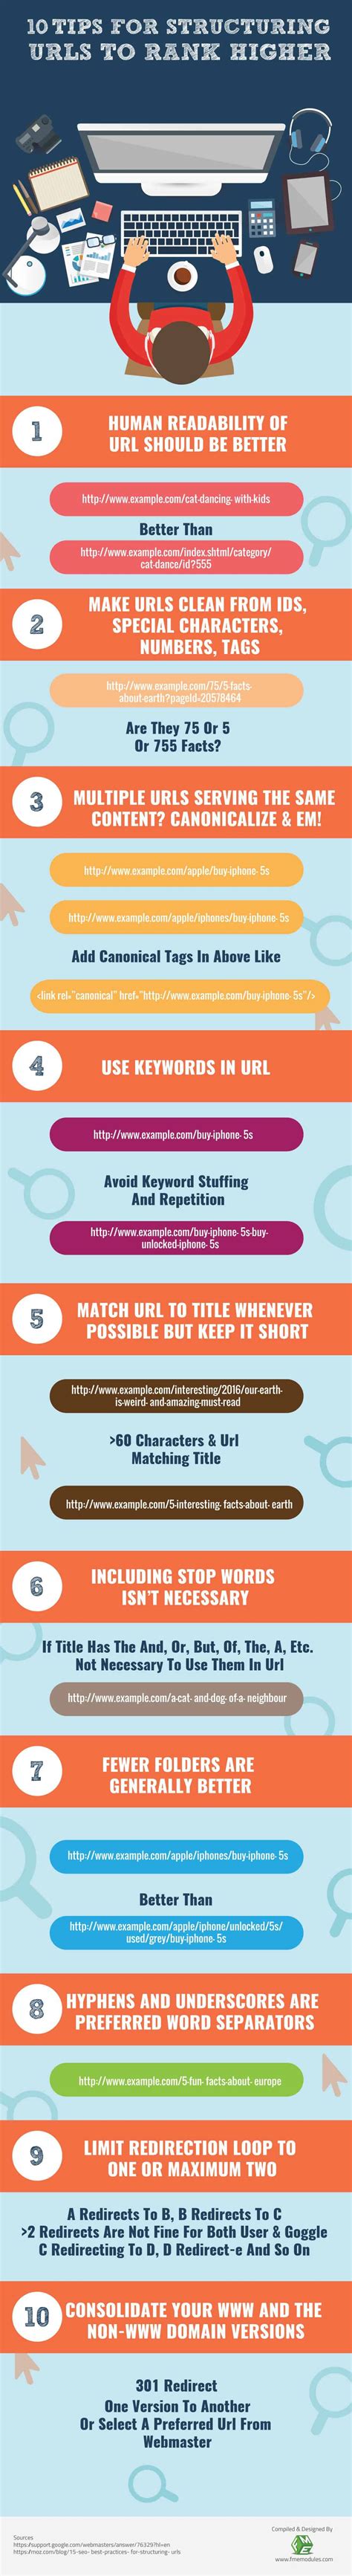 URL Structure & SEO: 10 Tips to Rank Higher on Google